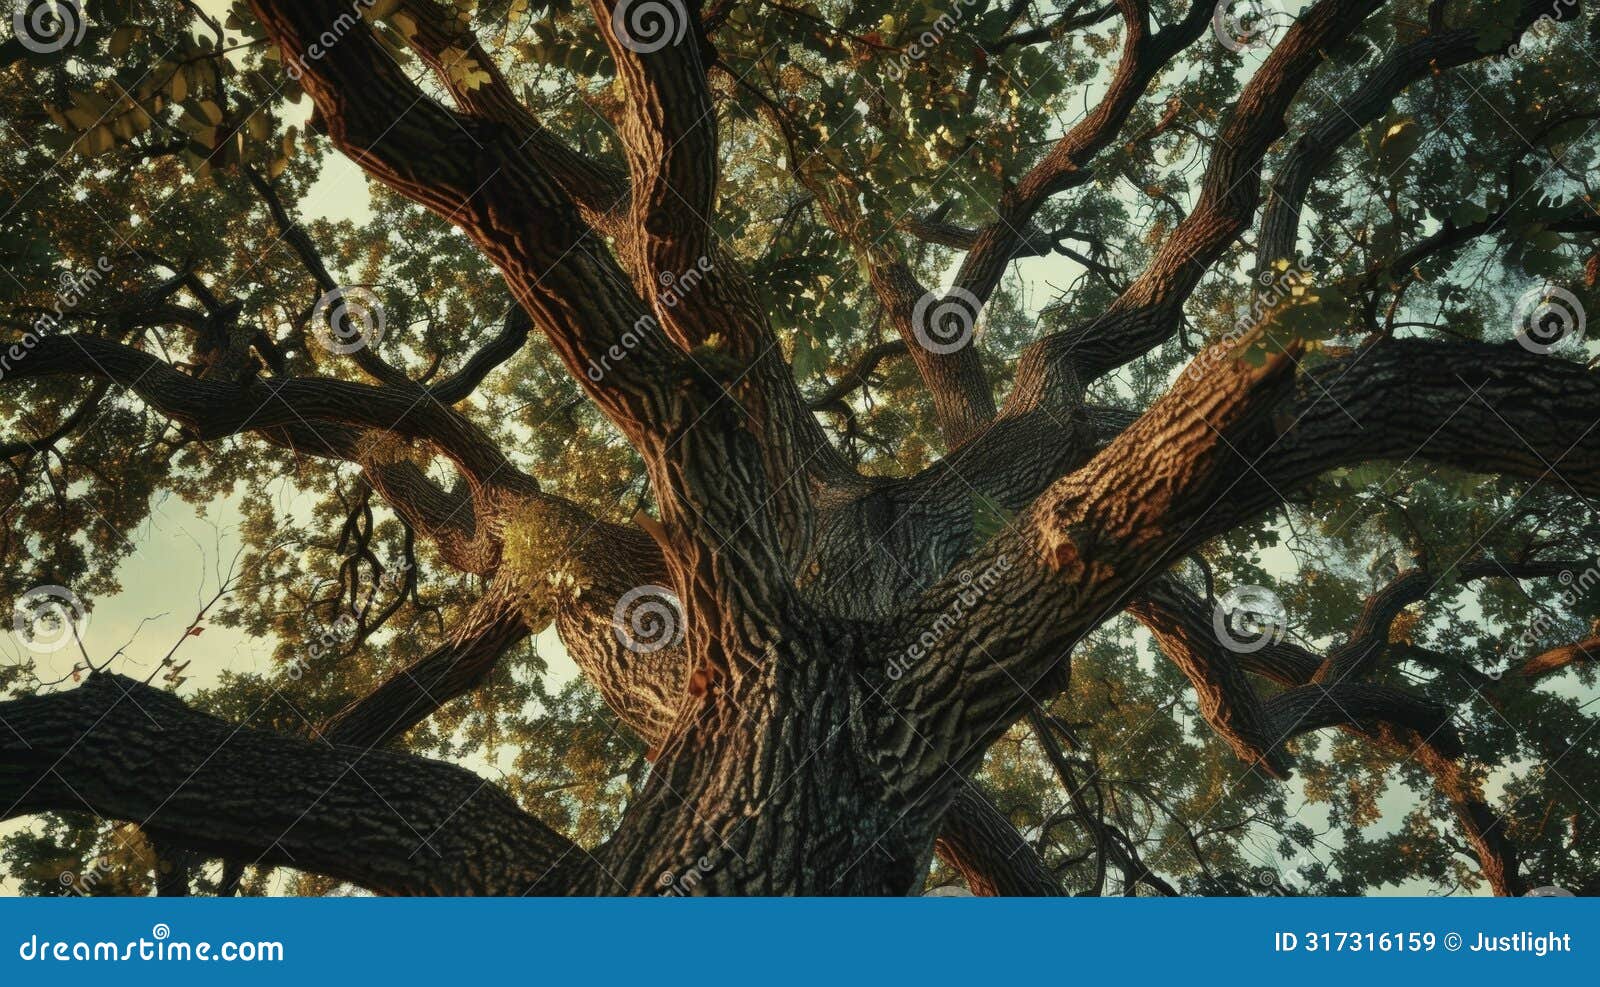 a majestic oak tree its branches rustling in unison with the melodies of birds singing their evening songs